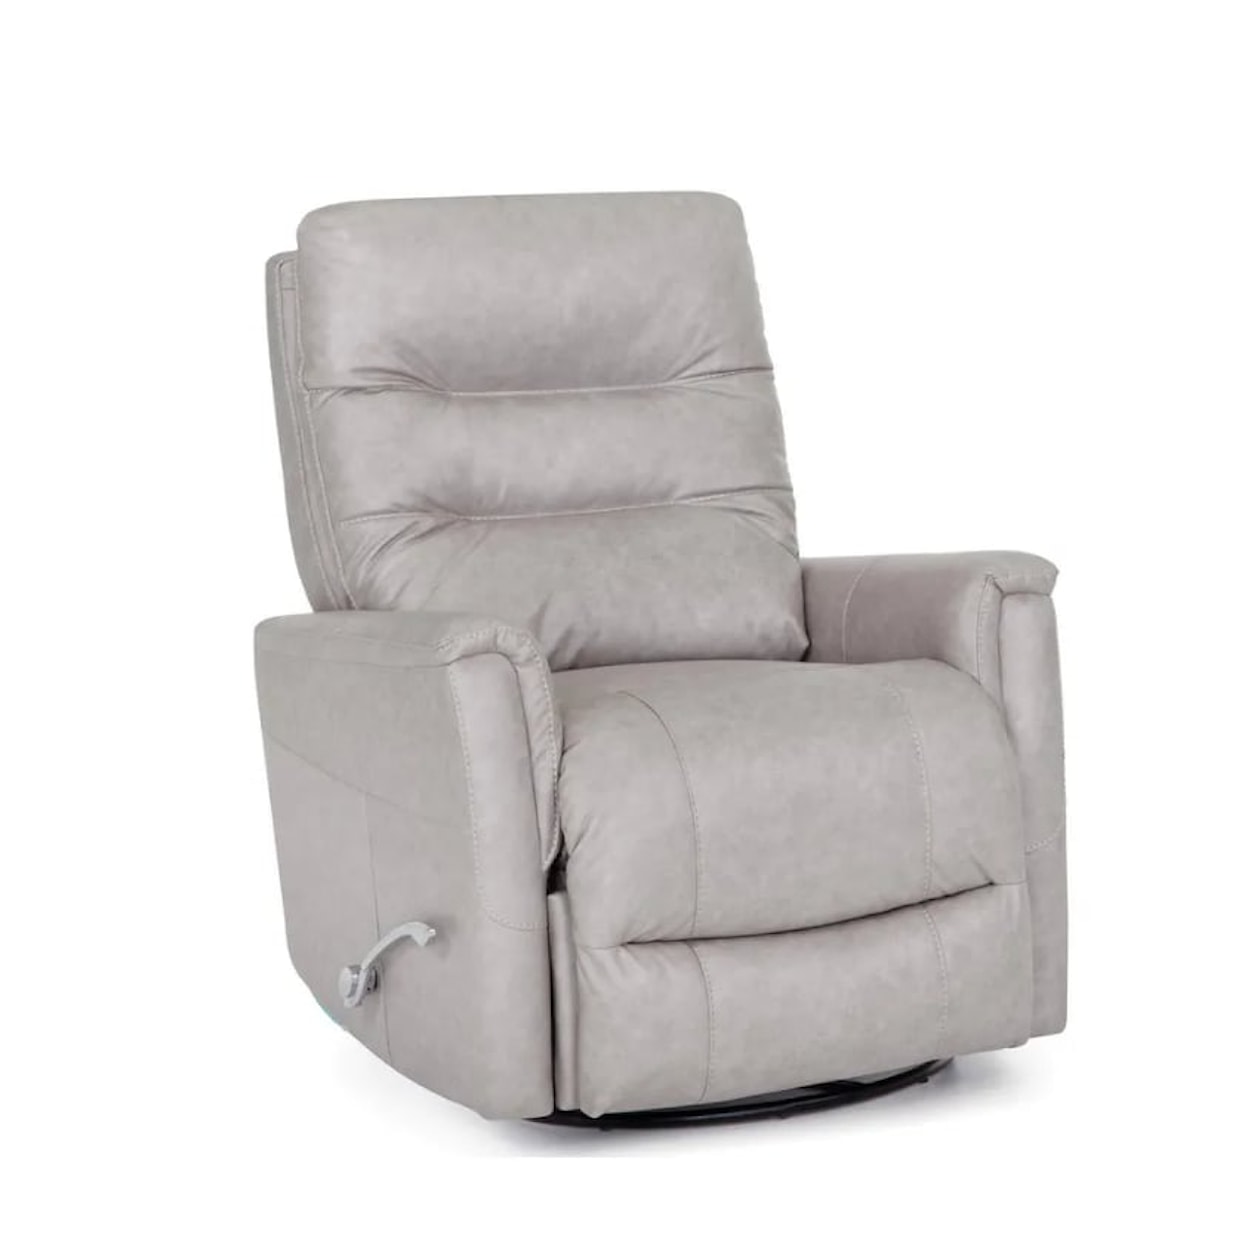 Franklin Recliners LEAH SILVER SWIVEL GLIDER RECLINER | .